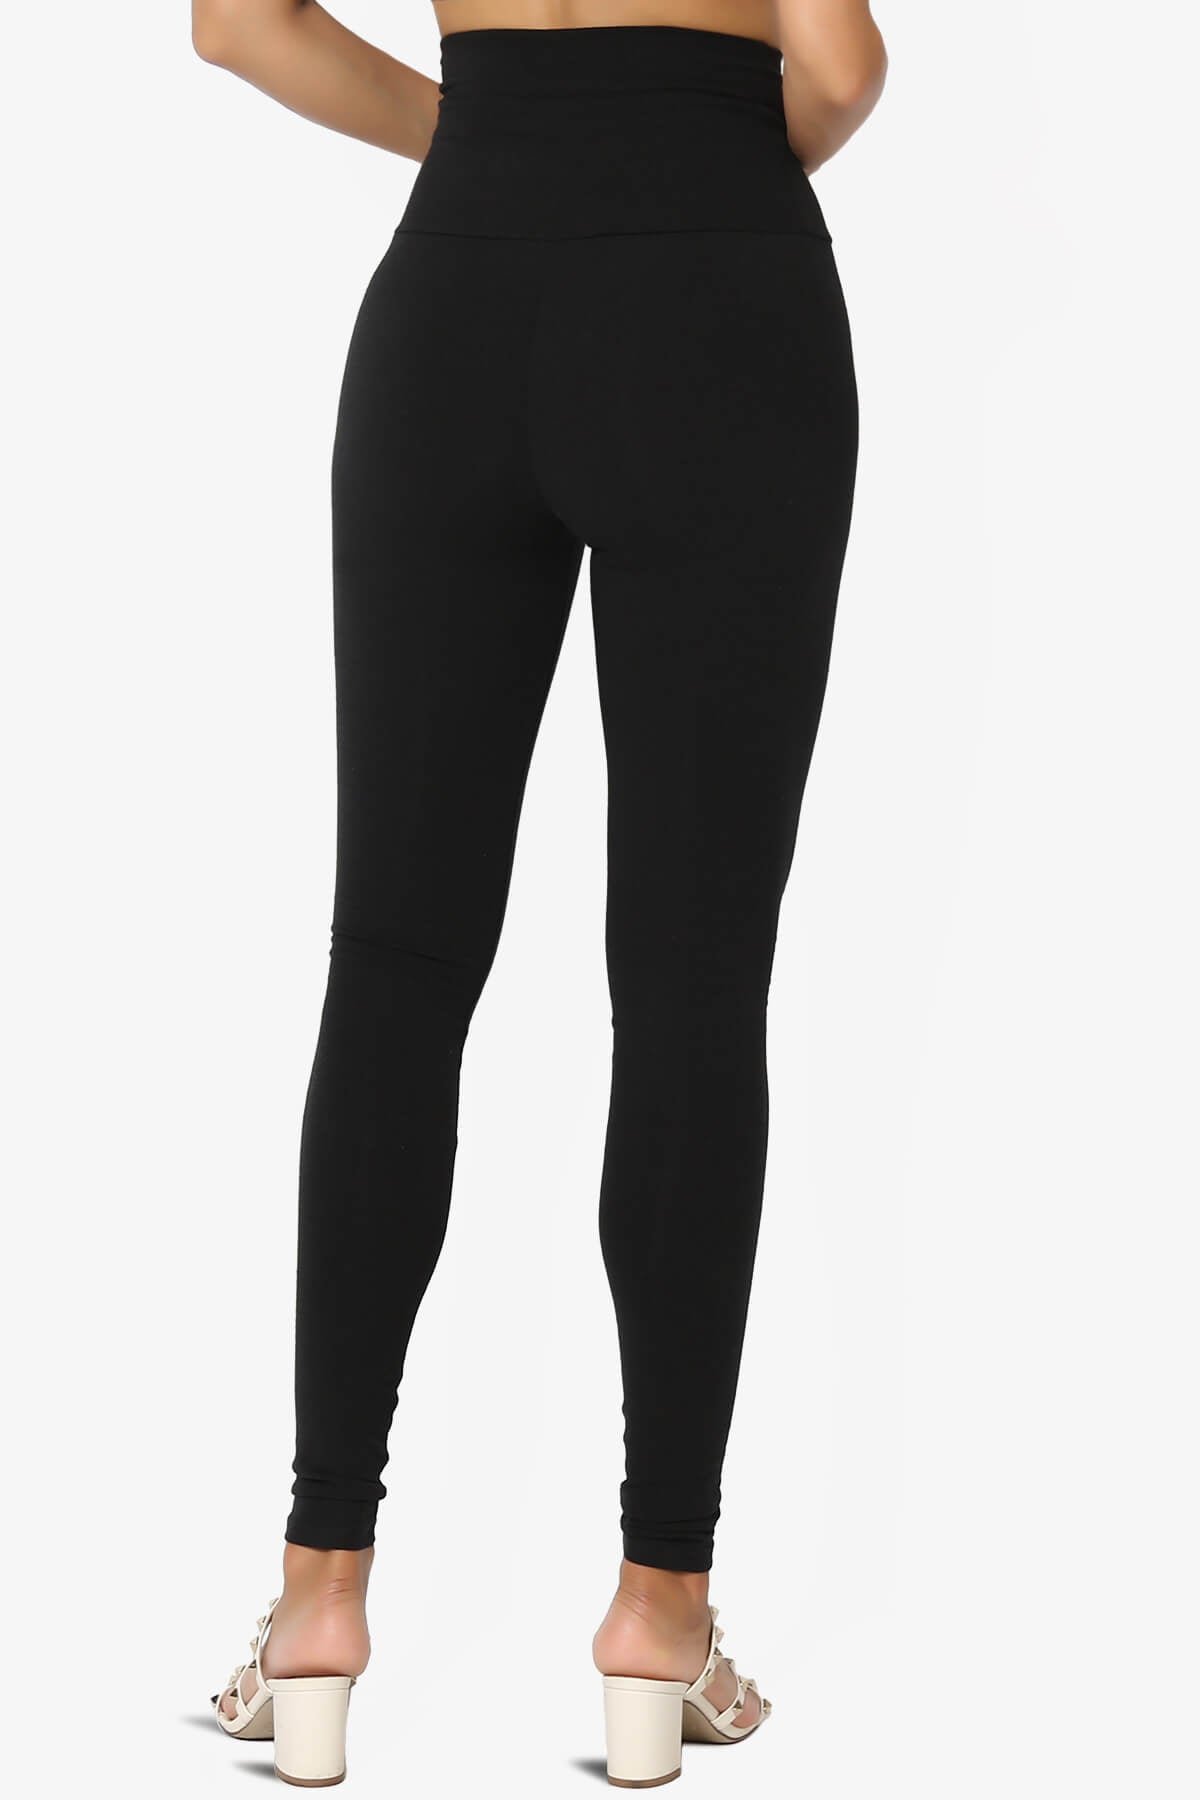 Load image into Gallery viewer, Seraphina High Waist Cotton Ankle Leggings BLACK_2
